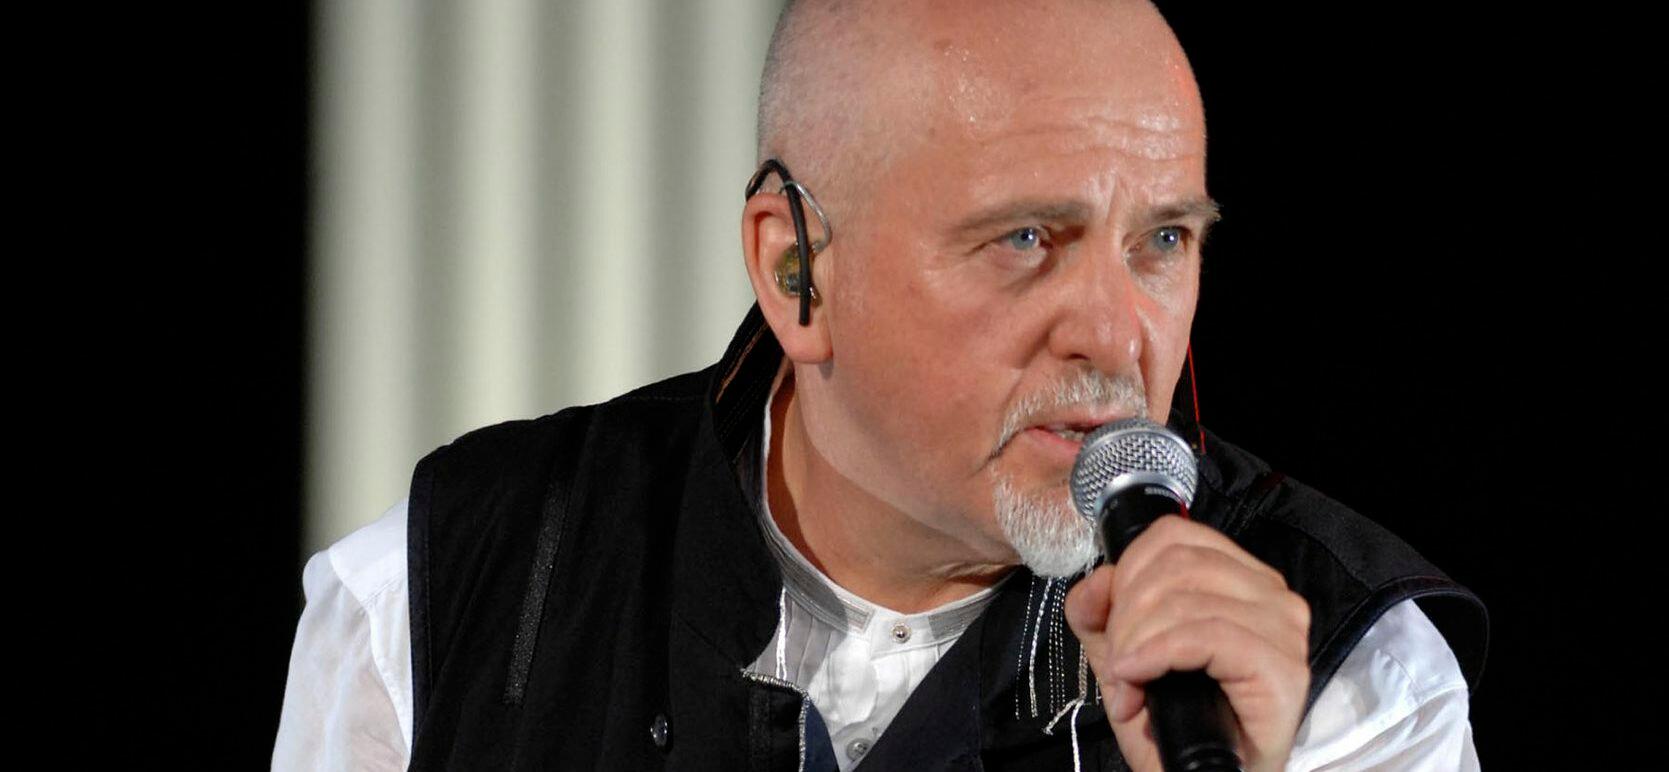 US ONLY PETER GABRIEL PERFORMING LIVE ON STAGE AT THE HYDE PARK CALLING MUSIC FESTIVAL IN LONDON